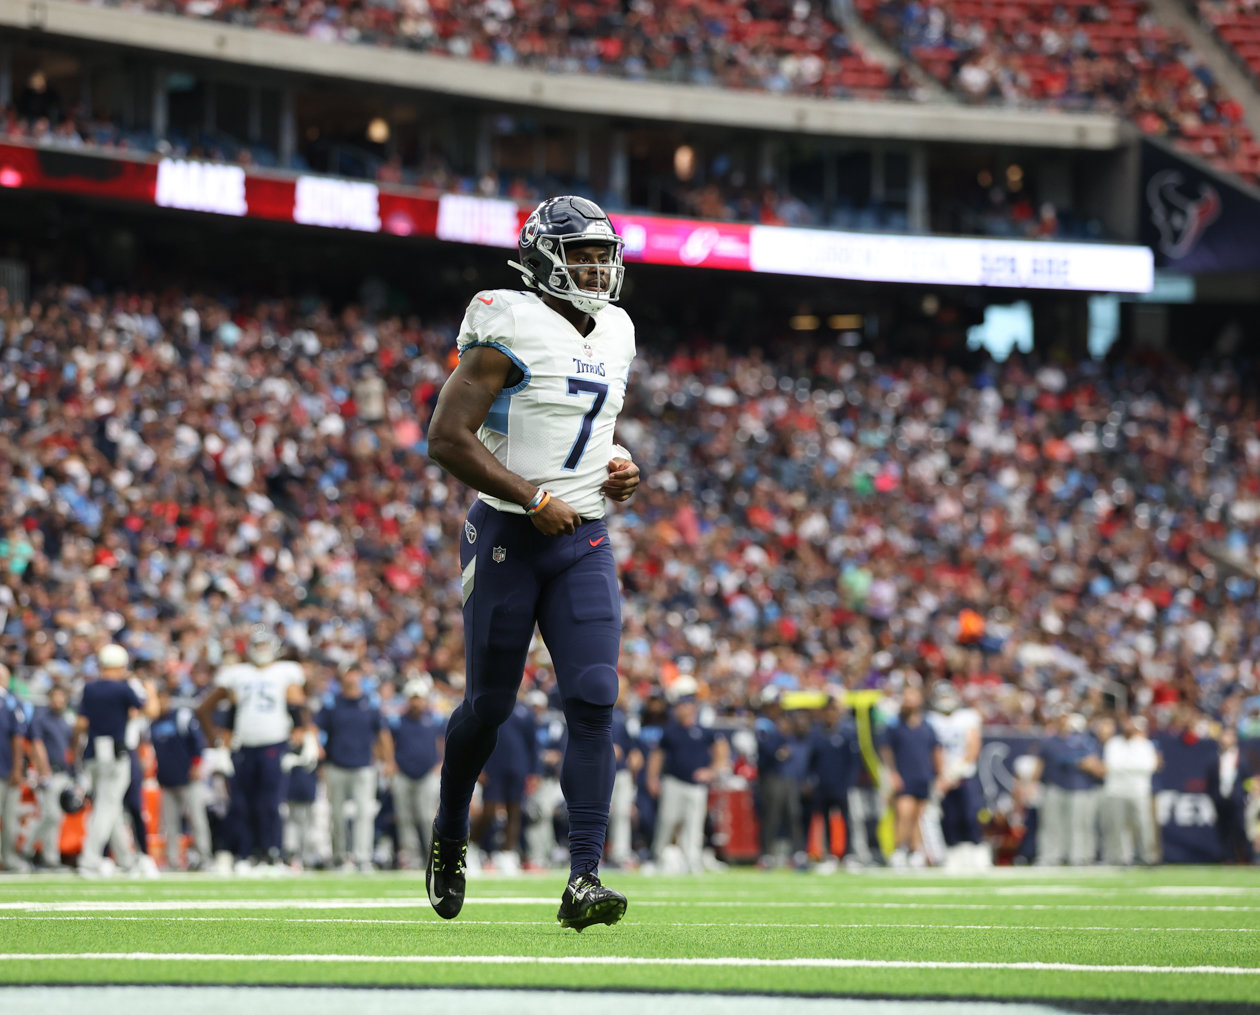 Titans quarterback Malik Willis (7) during an NFL game between the Texans and the Titans on Oct. 30, 2022 in Houston.